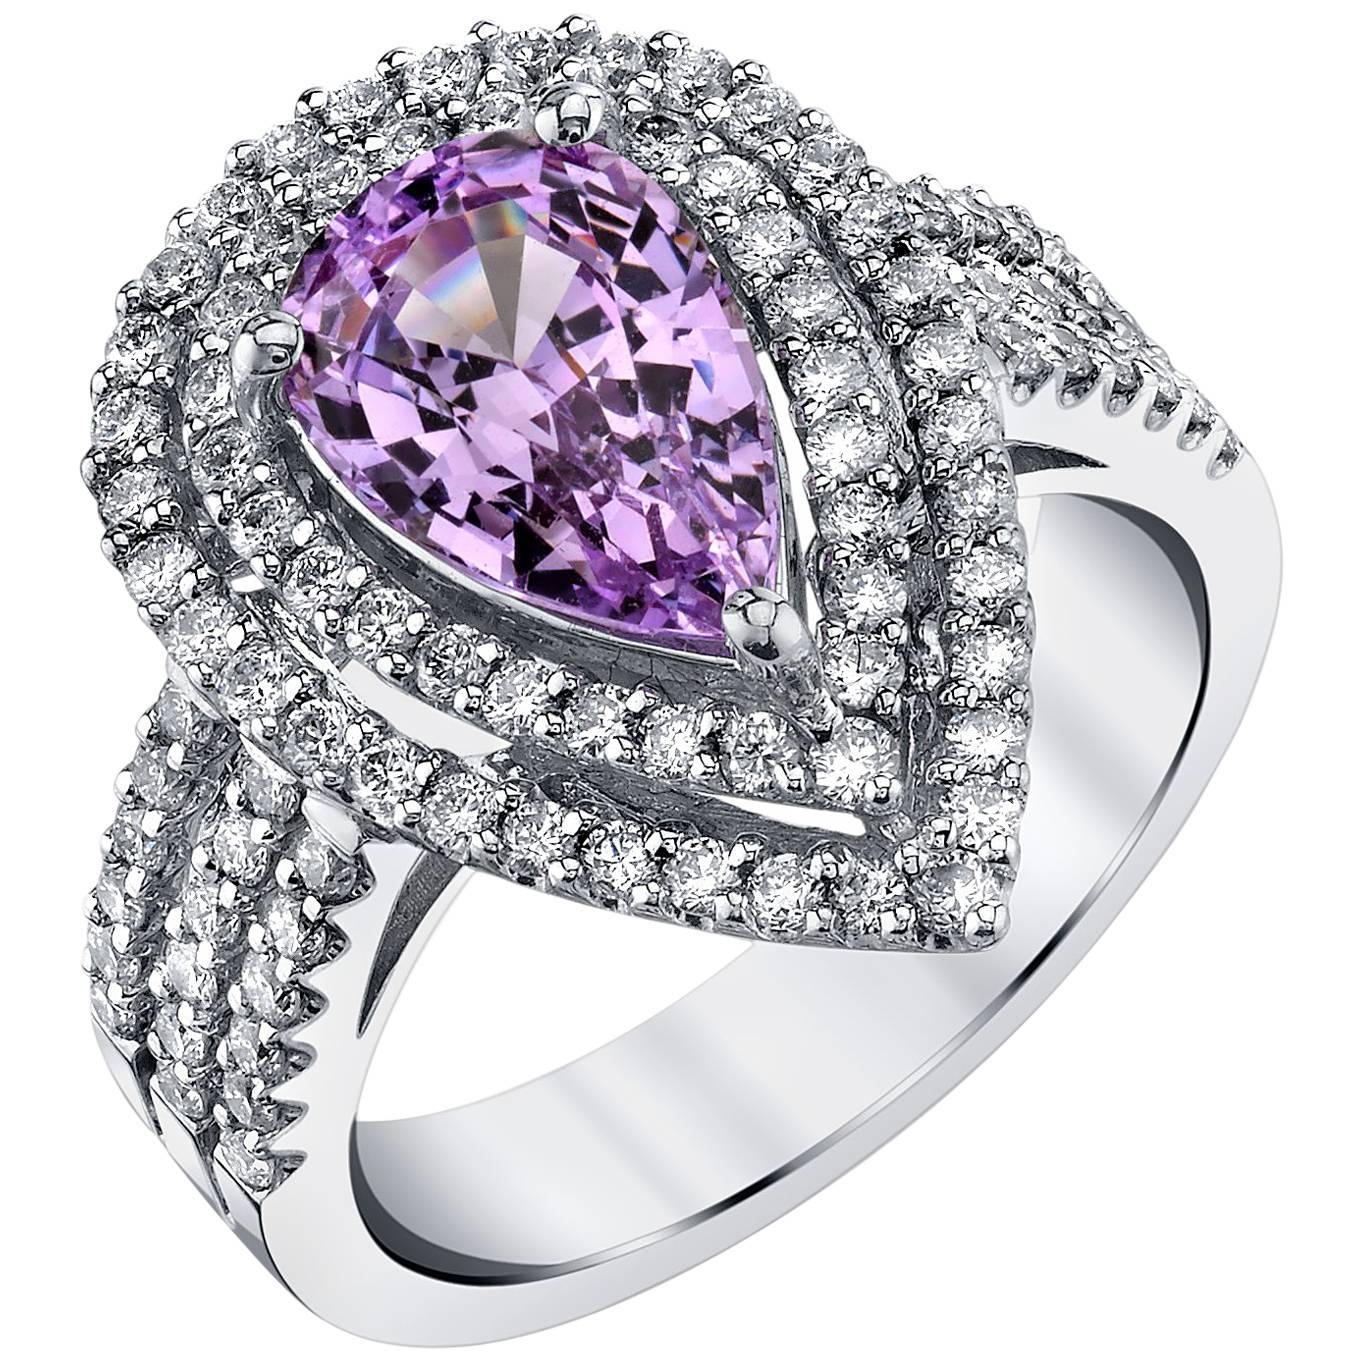 2.29 Carat Lavender Spinel and Diamond Halo Cocktail Ring in 18k White Gold